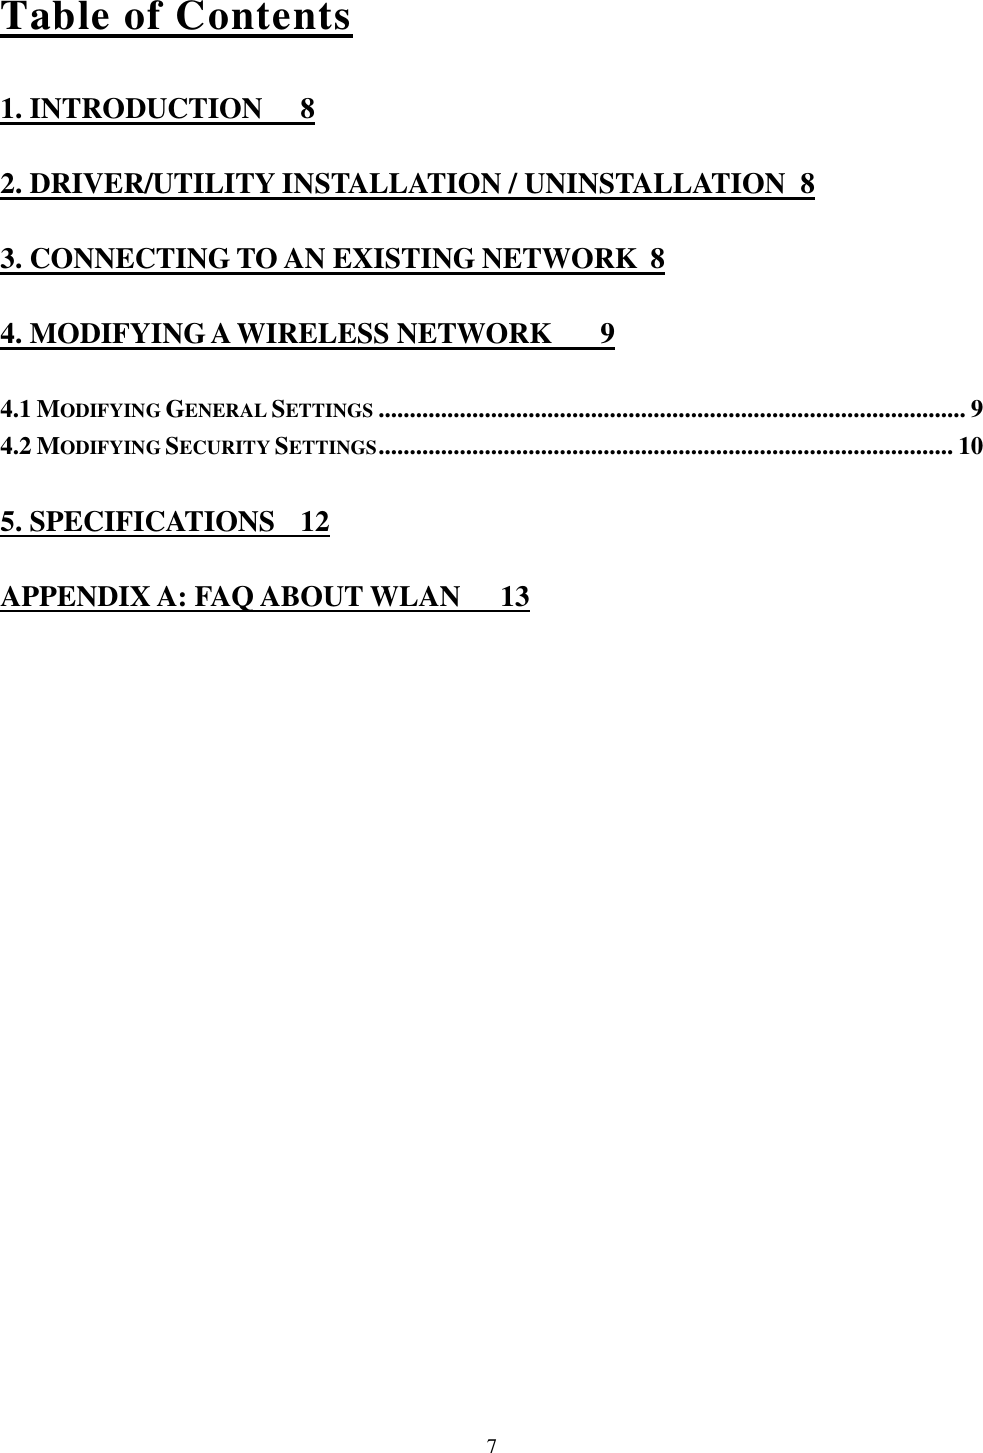  7 Table of Contents 1. INTRODUCTION  8 2. DRIVER/UTILITY INSTALLATION / UNINSTALLATION  8 3. CONNECTING TO AN EXISTING NETWORK  8 4. MODIFYING A WIRELESS NETWORK  9 4.1 MODIFYING GENERAL SETTINGS .............................................................................................. 9 4.2 MODIFYING SECURITY SETTINGS ............................................................................................ 10 5. SPECIFICATIONS  12 APPENDIX A: FAQ ABOUT WLAN  13 